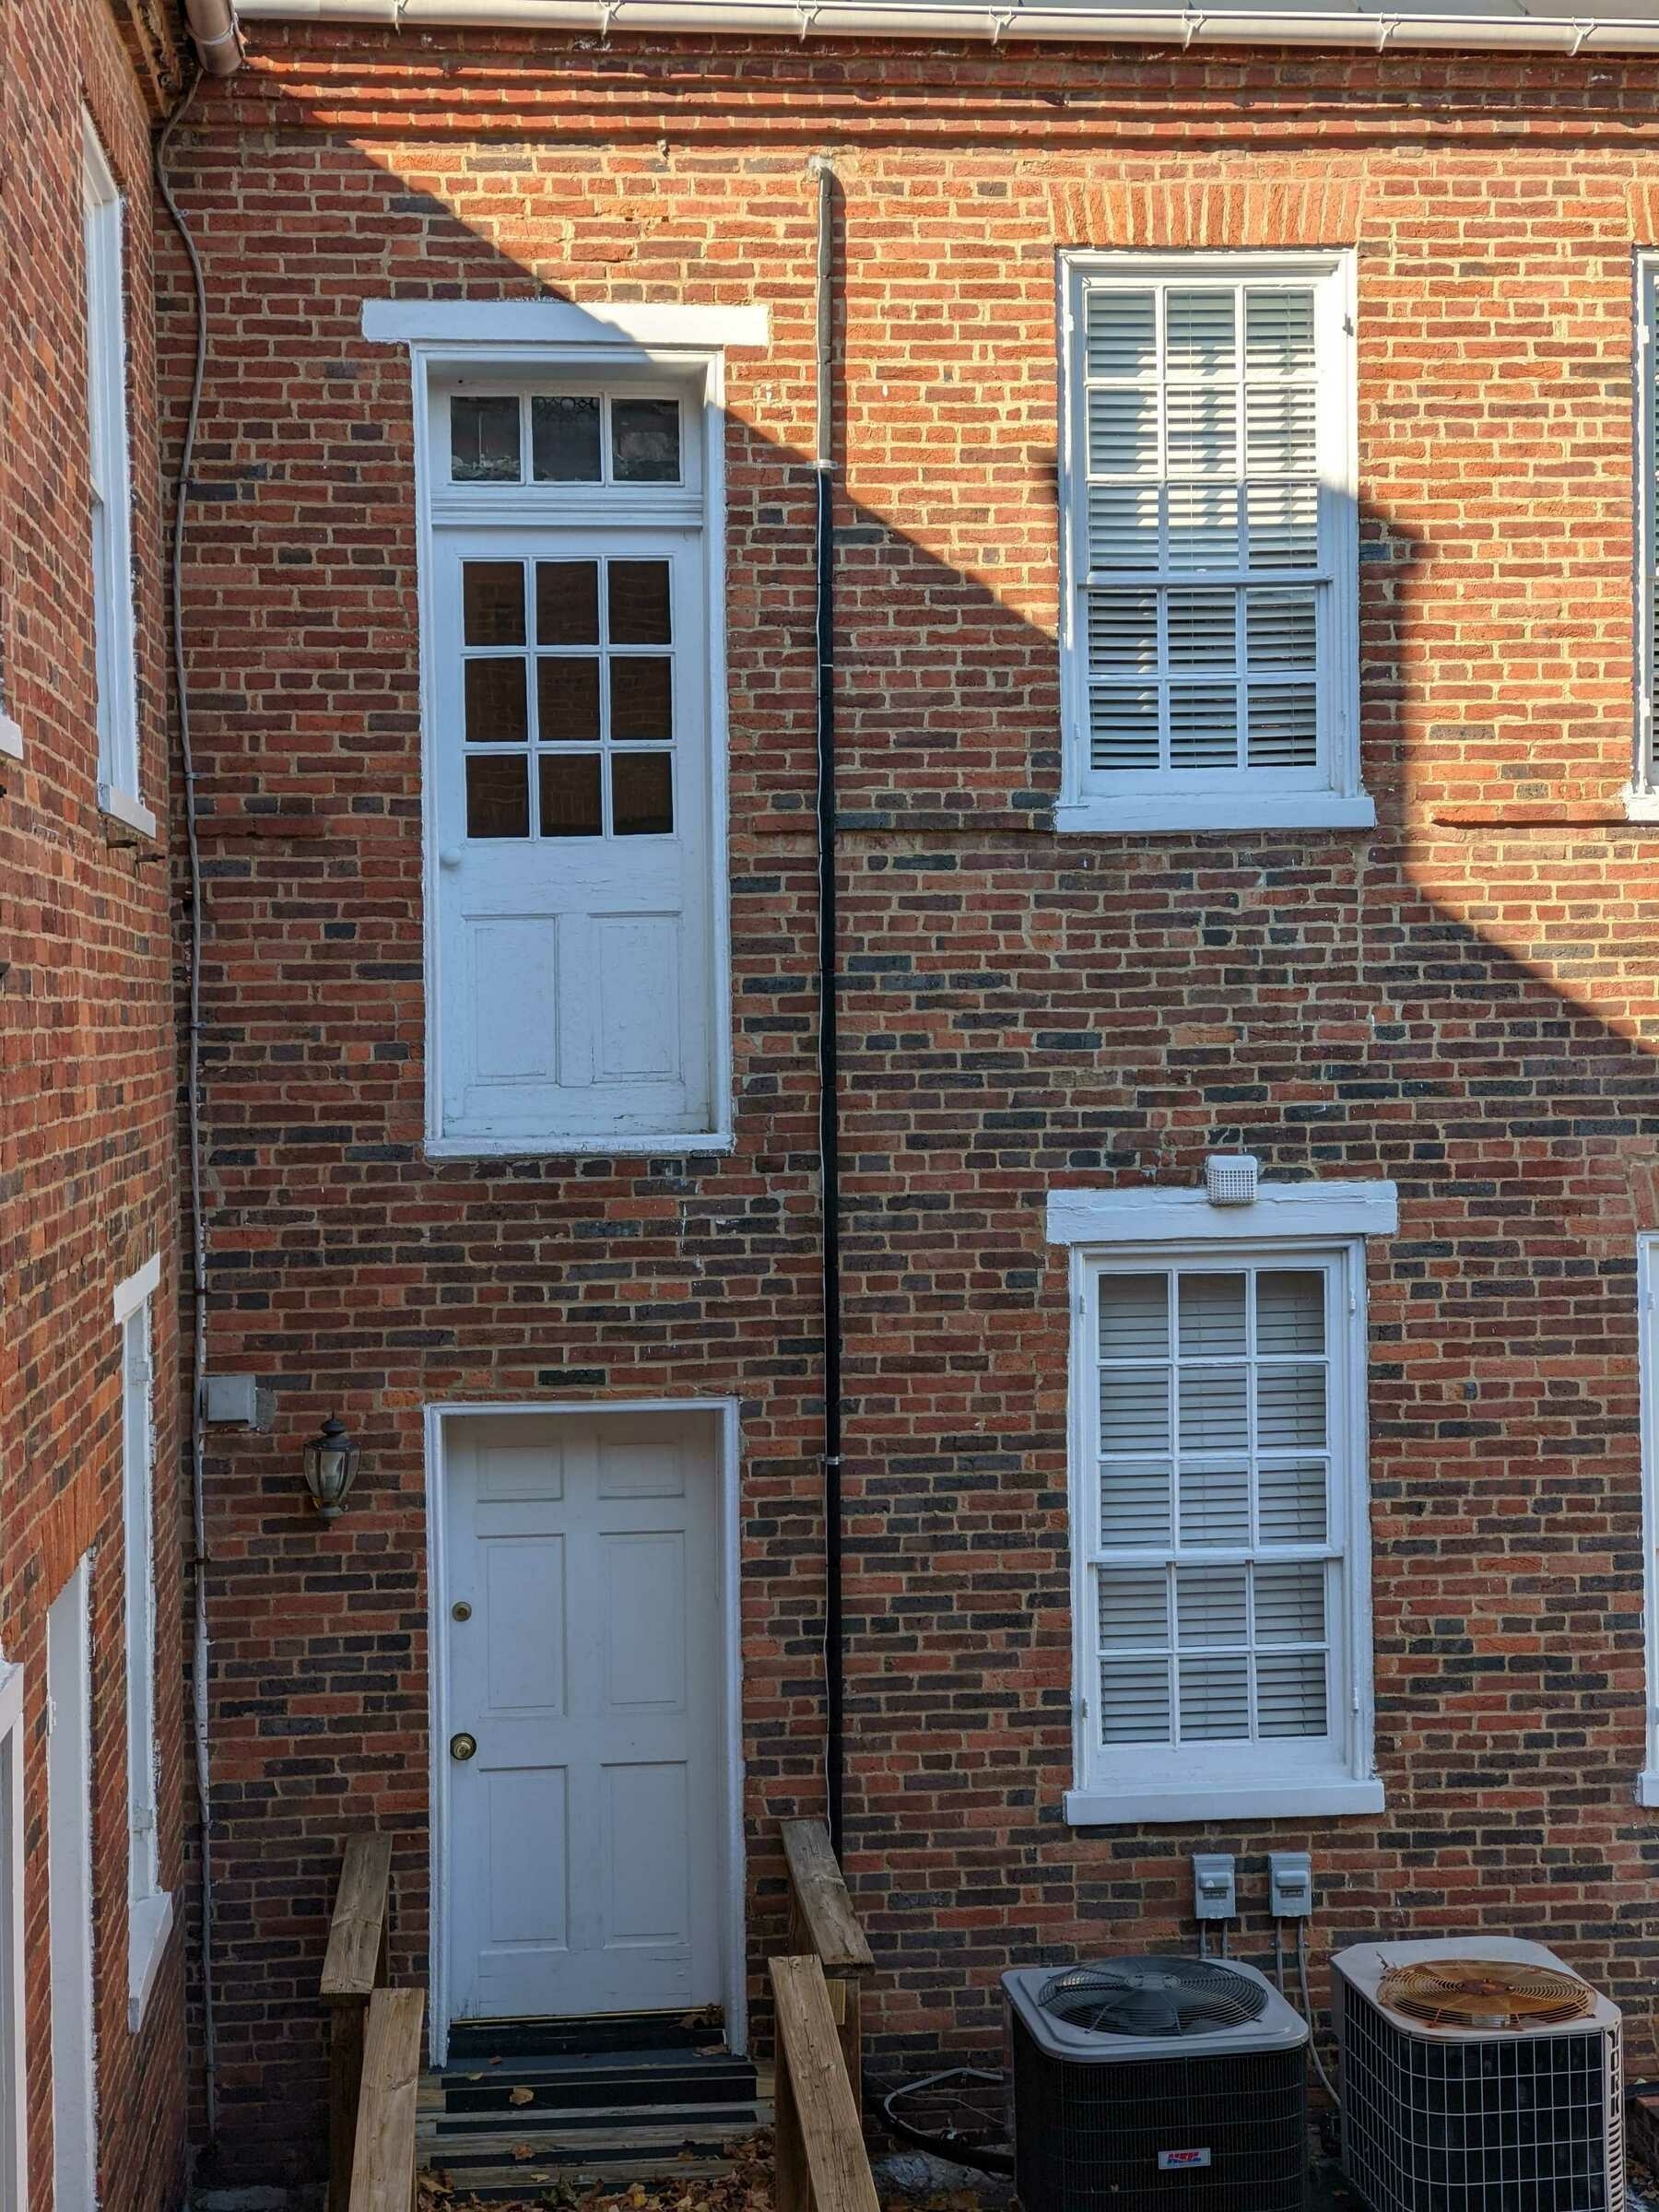 on the second story of an old brick building, is a door with no stairwell or balcony attached